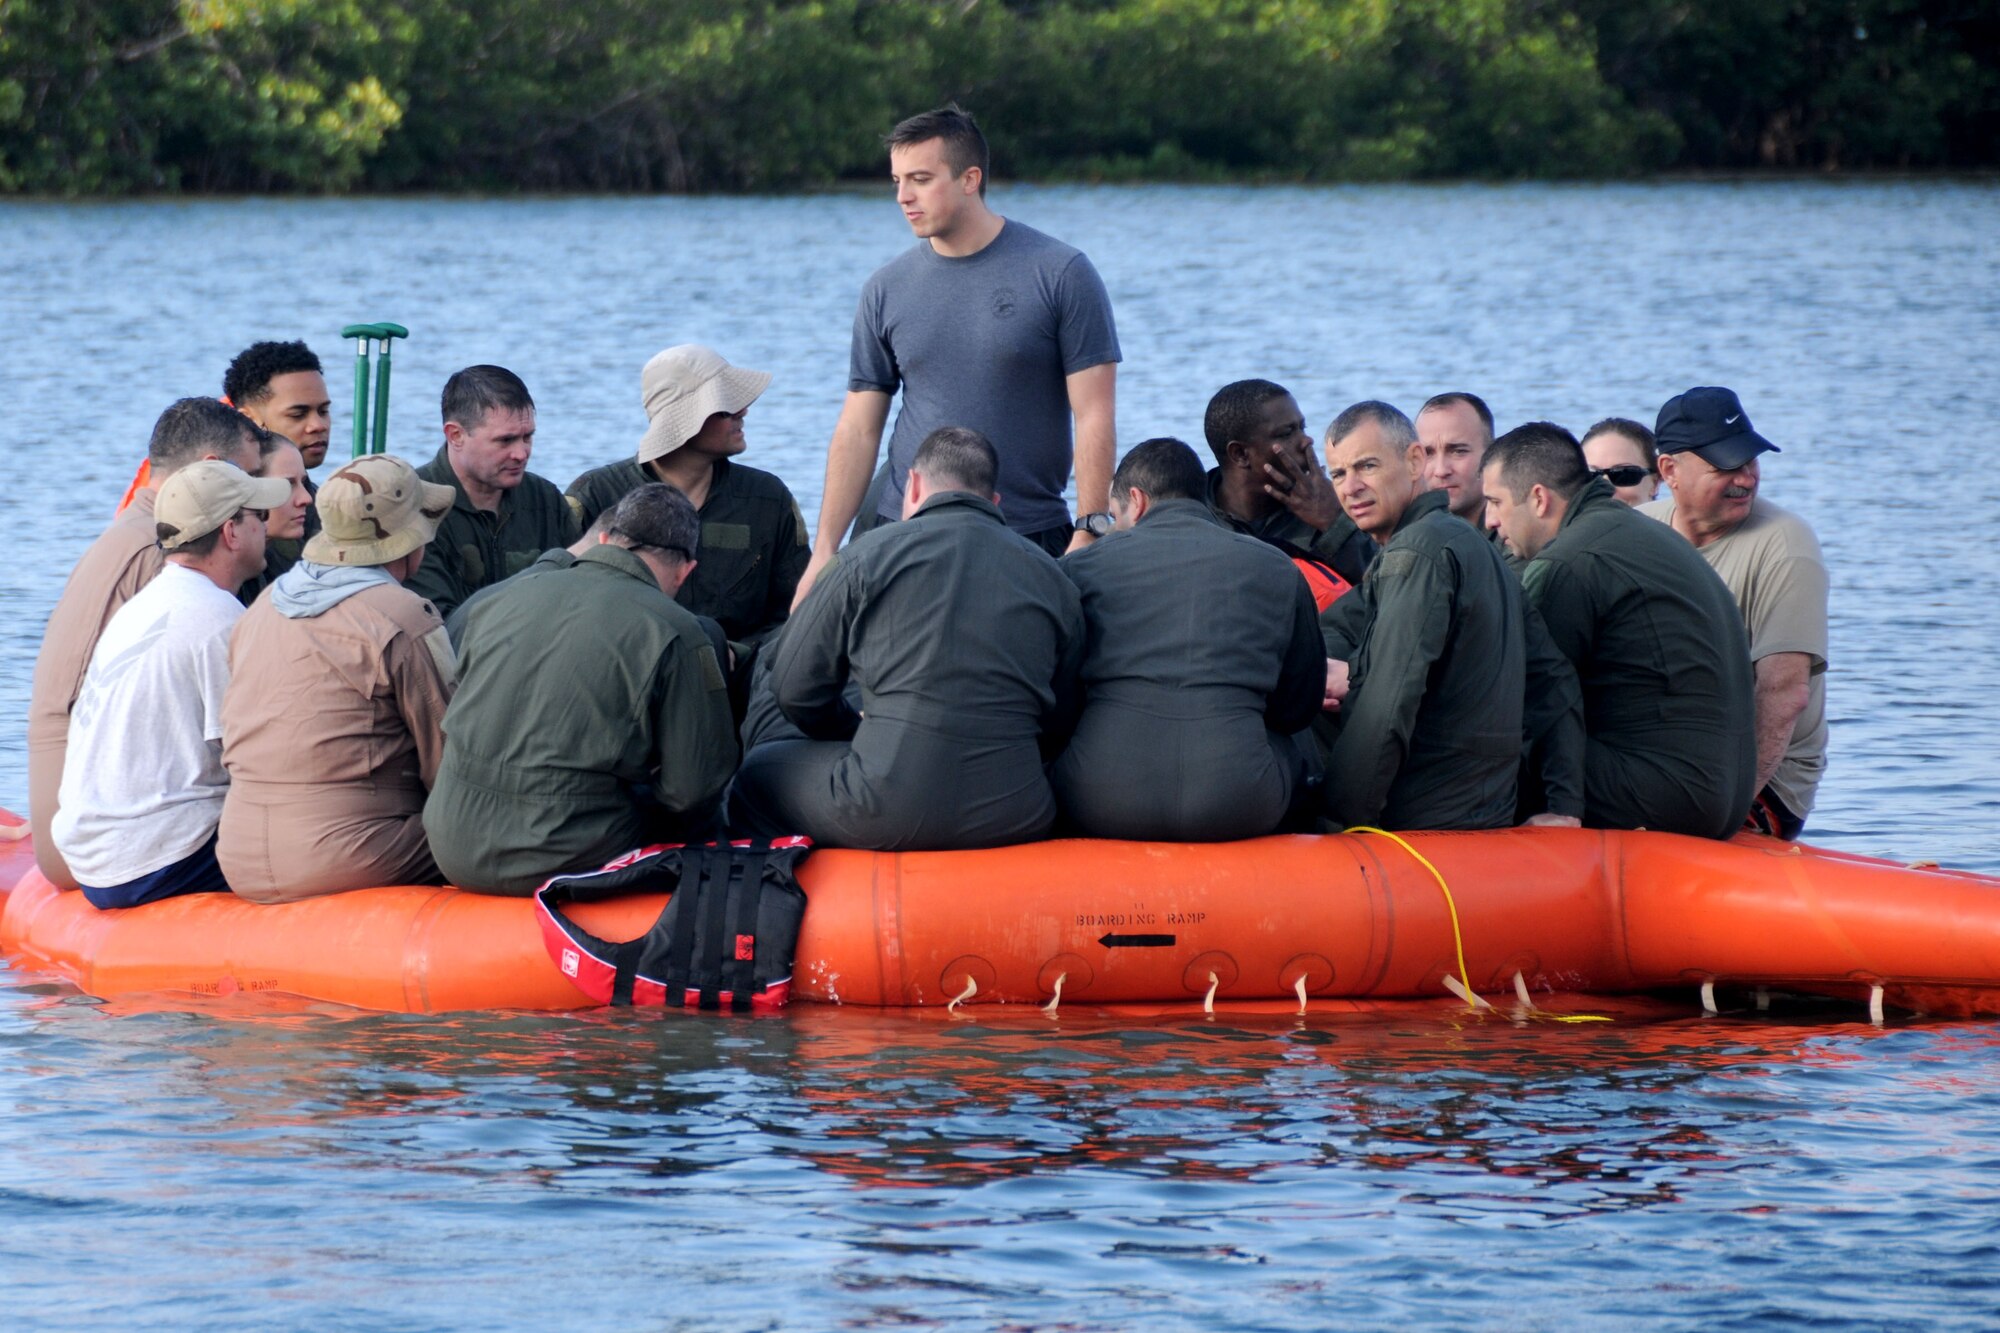 A Survival, Evade, Resistance and Escape trainer speaks with members of the 94th Operations Group during Water Survival Training at Naval Air Station Key West, Florida March 27, 2019. During the two-day Survival, Evasion, Resistance and Escape course SERE trainers and air flight equipment personnel led activities and ensured all the Airmen were prepared to handle the wide variety of emergency scenarios that can occur on the water. (U.S. Air Force photo/Senior Airman Justin Clayvon)